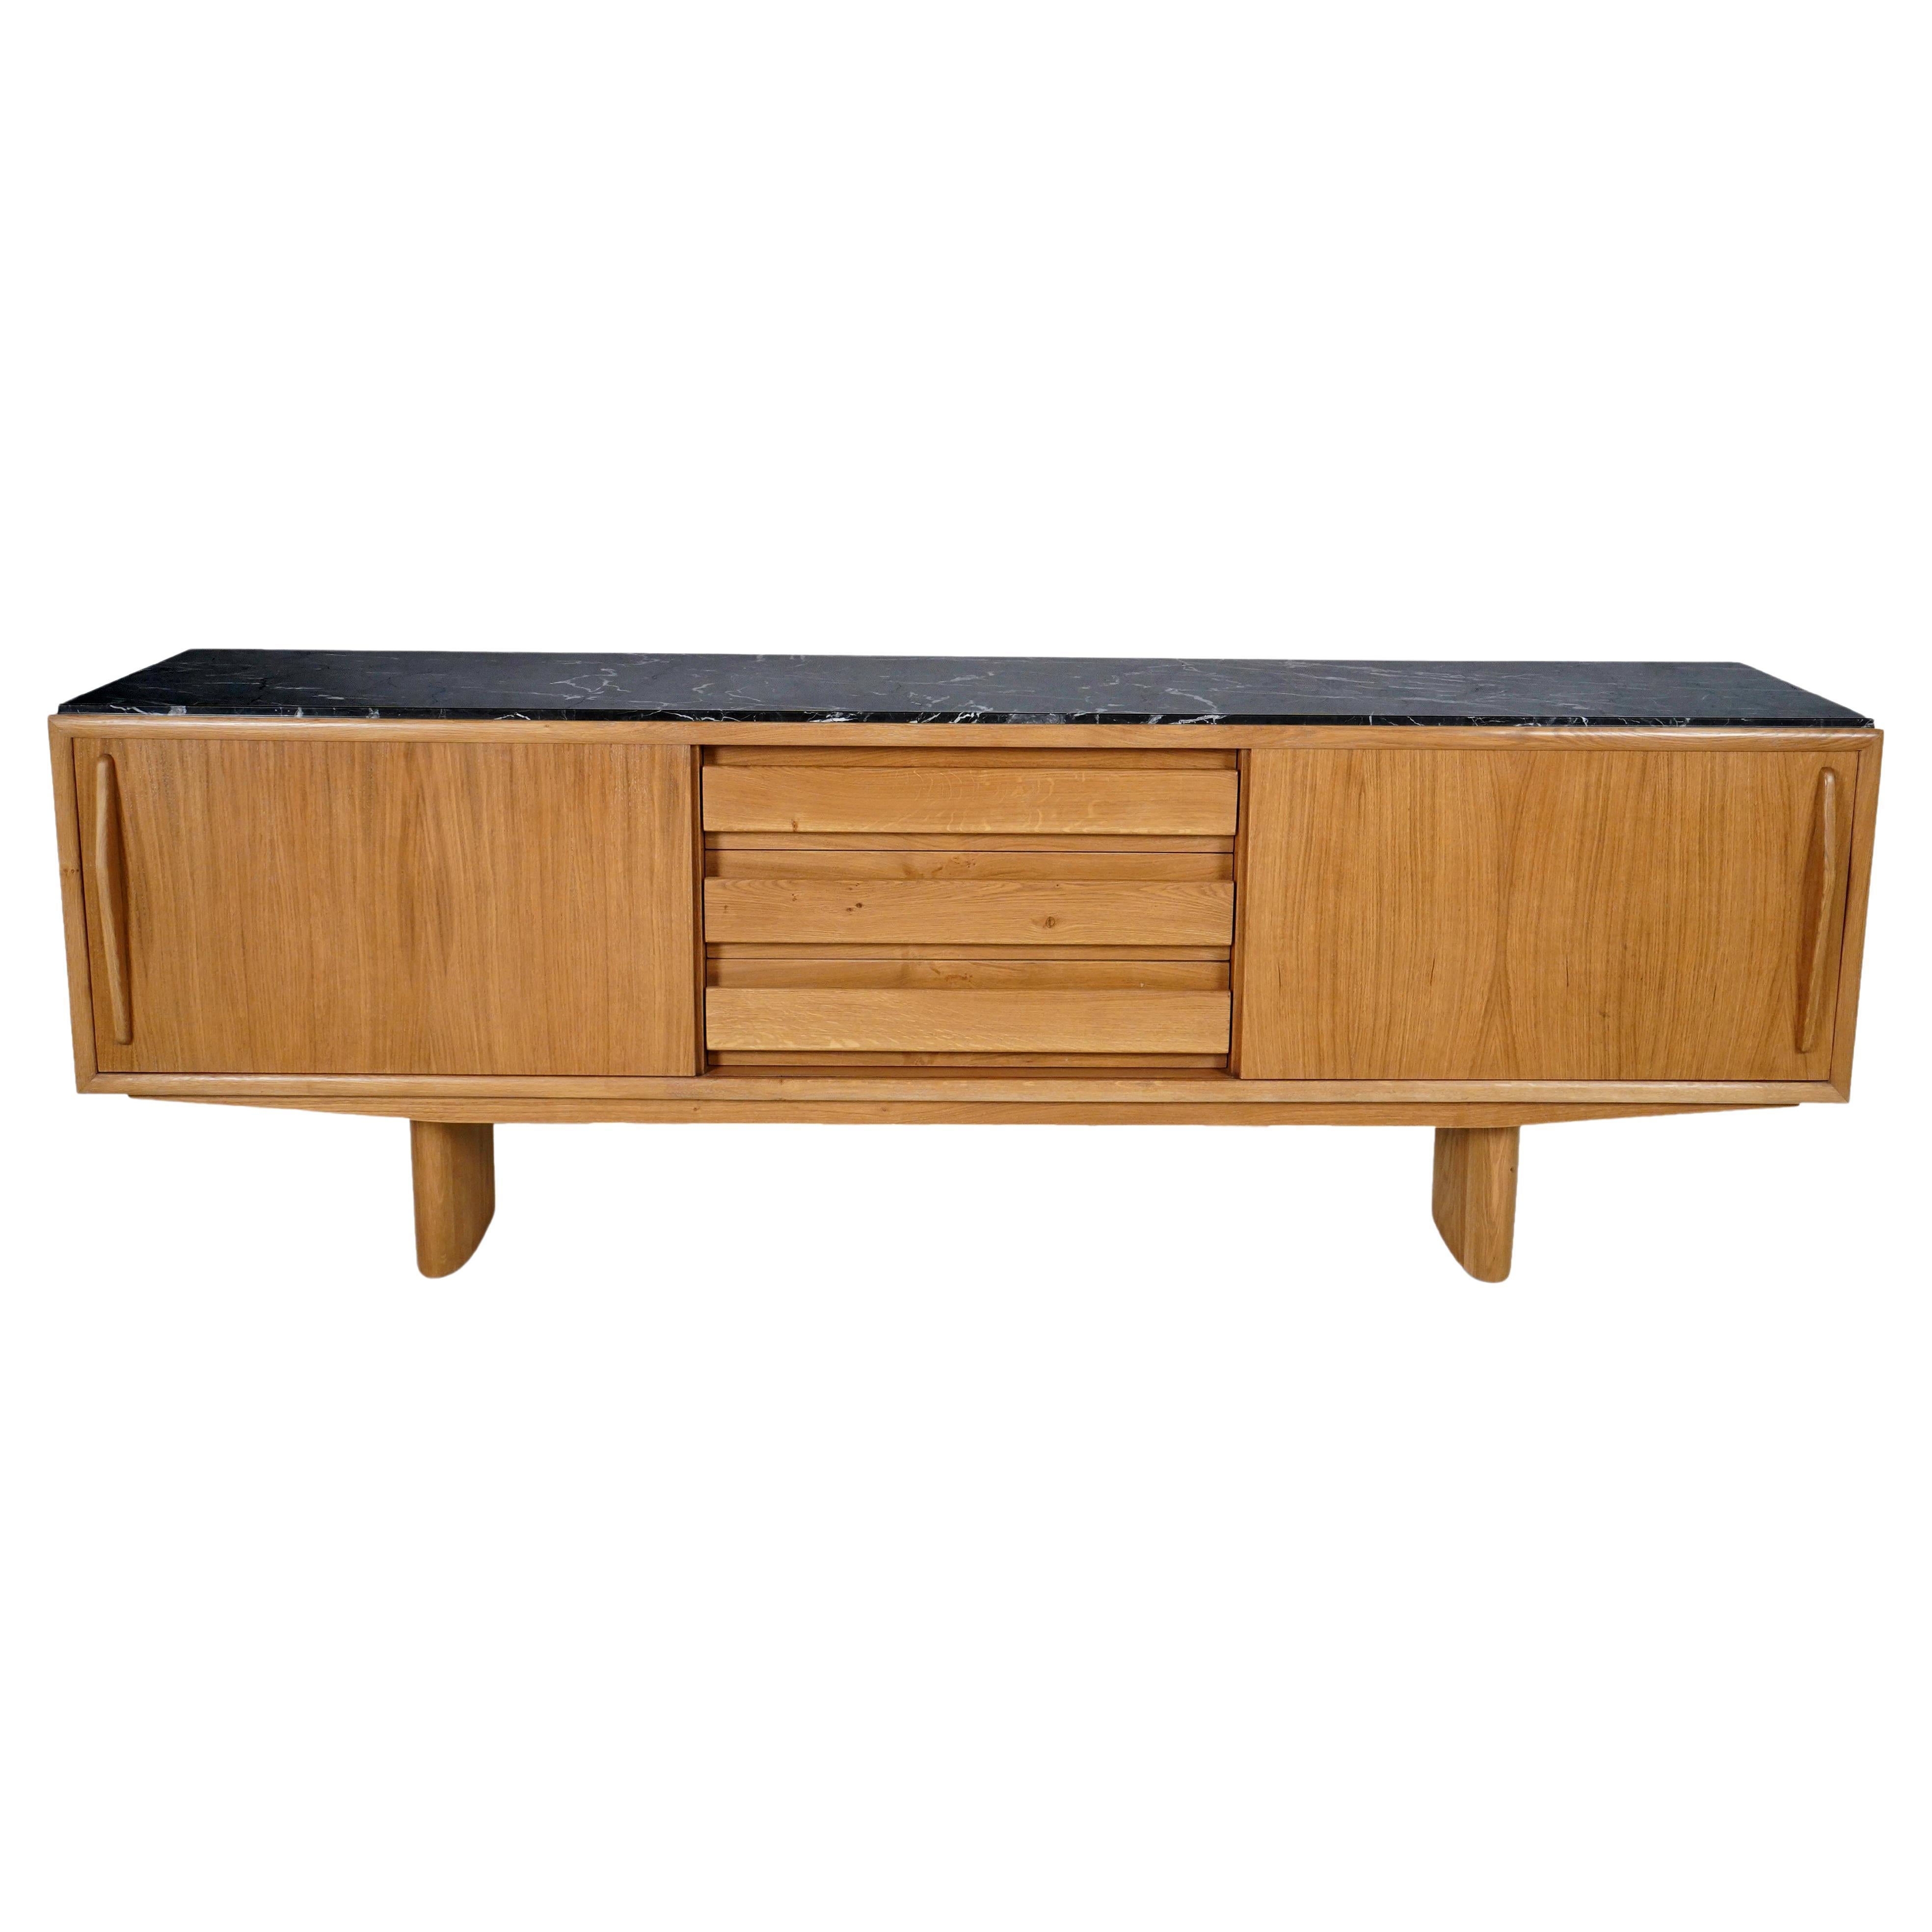 Mid-Century Modern Oak Sideboard with 2 Sliding Doors and 3 Drawers For Sale